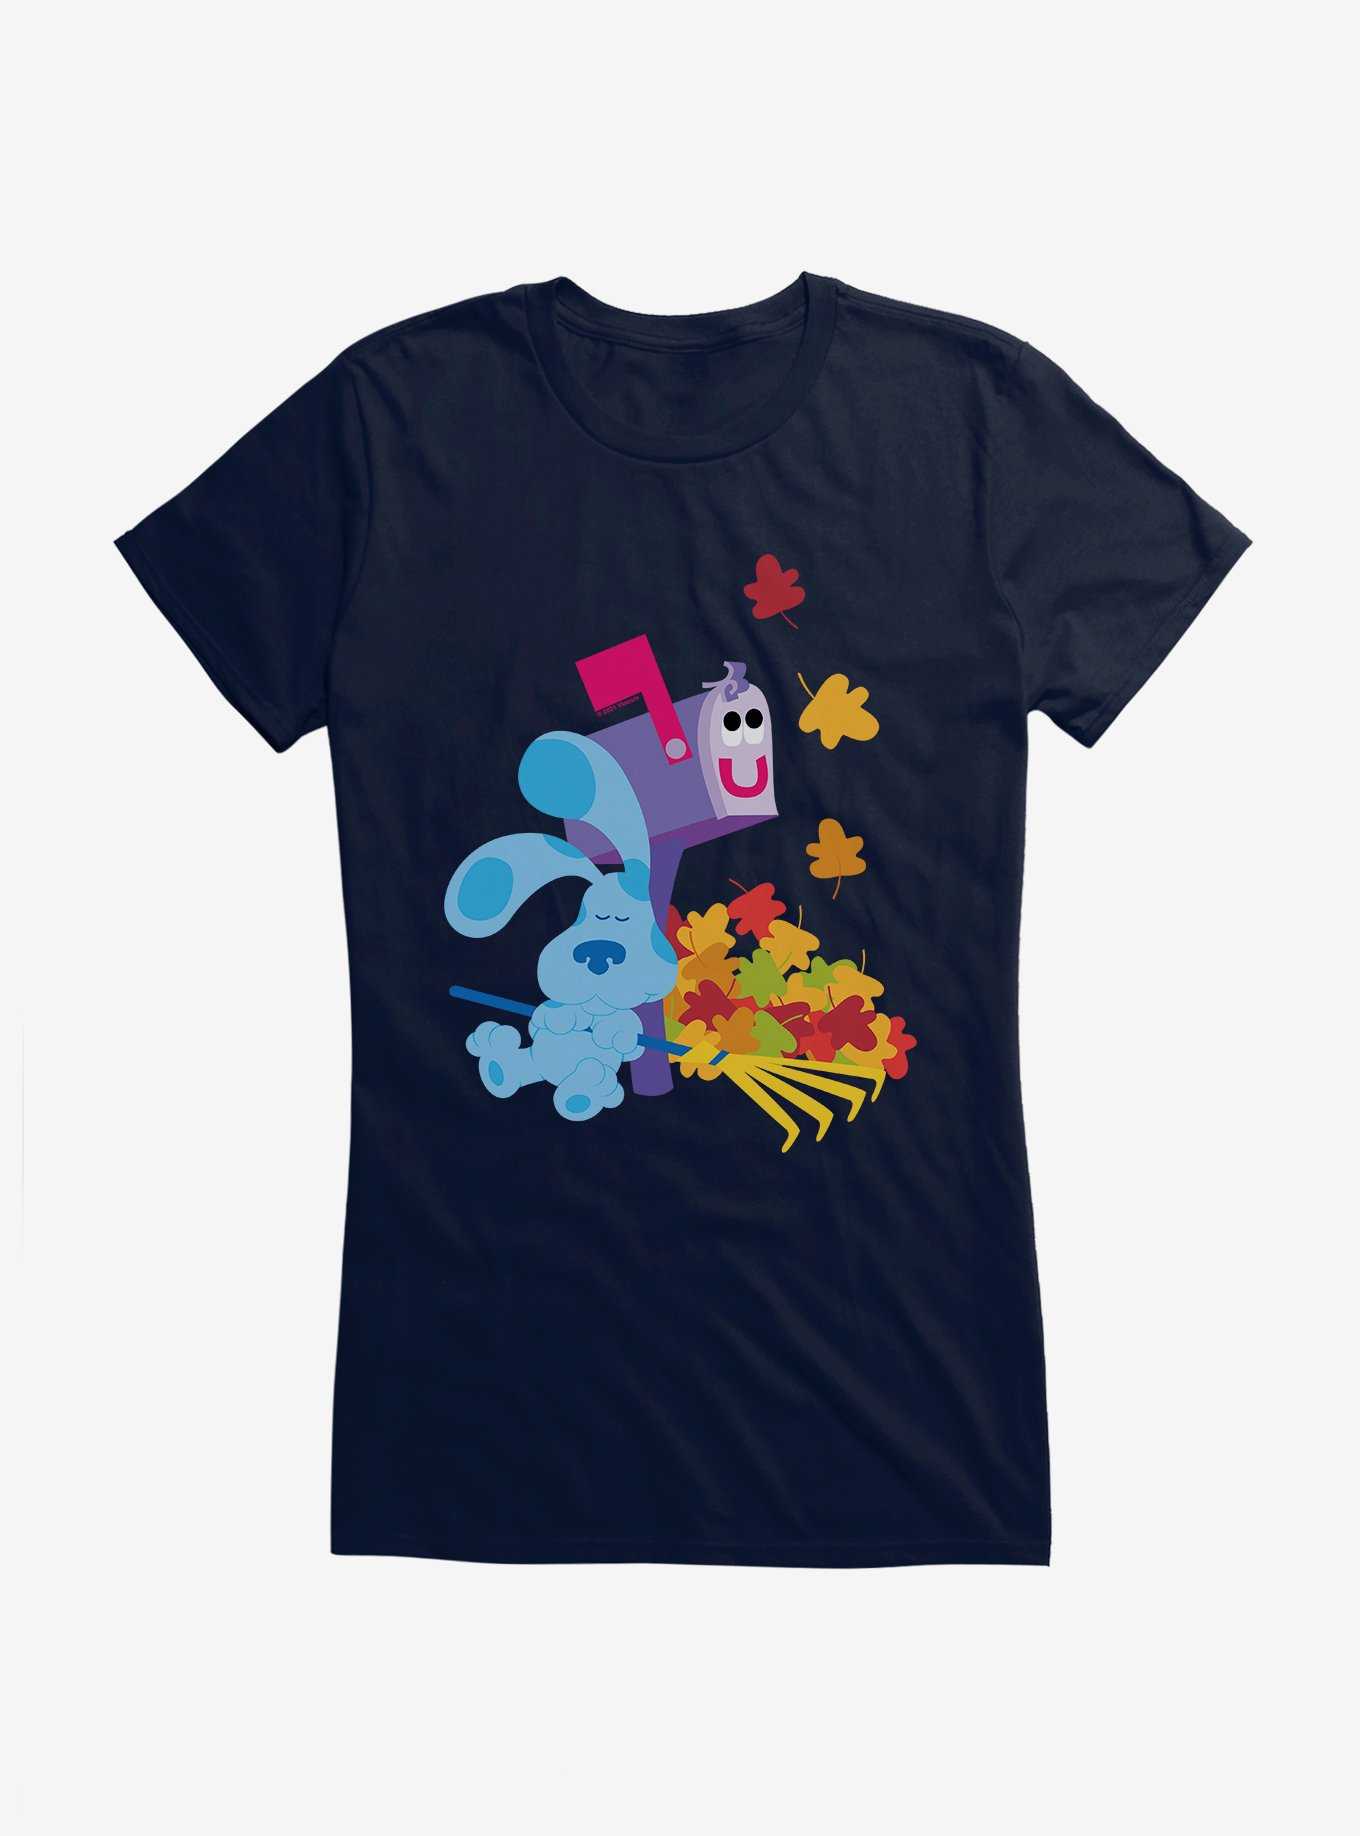 Blue's Clues Mailbox And Blue Autumn Leaves Girls T-Shirt, , hi-res